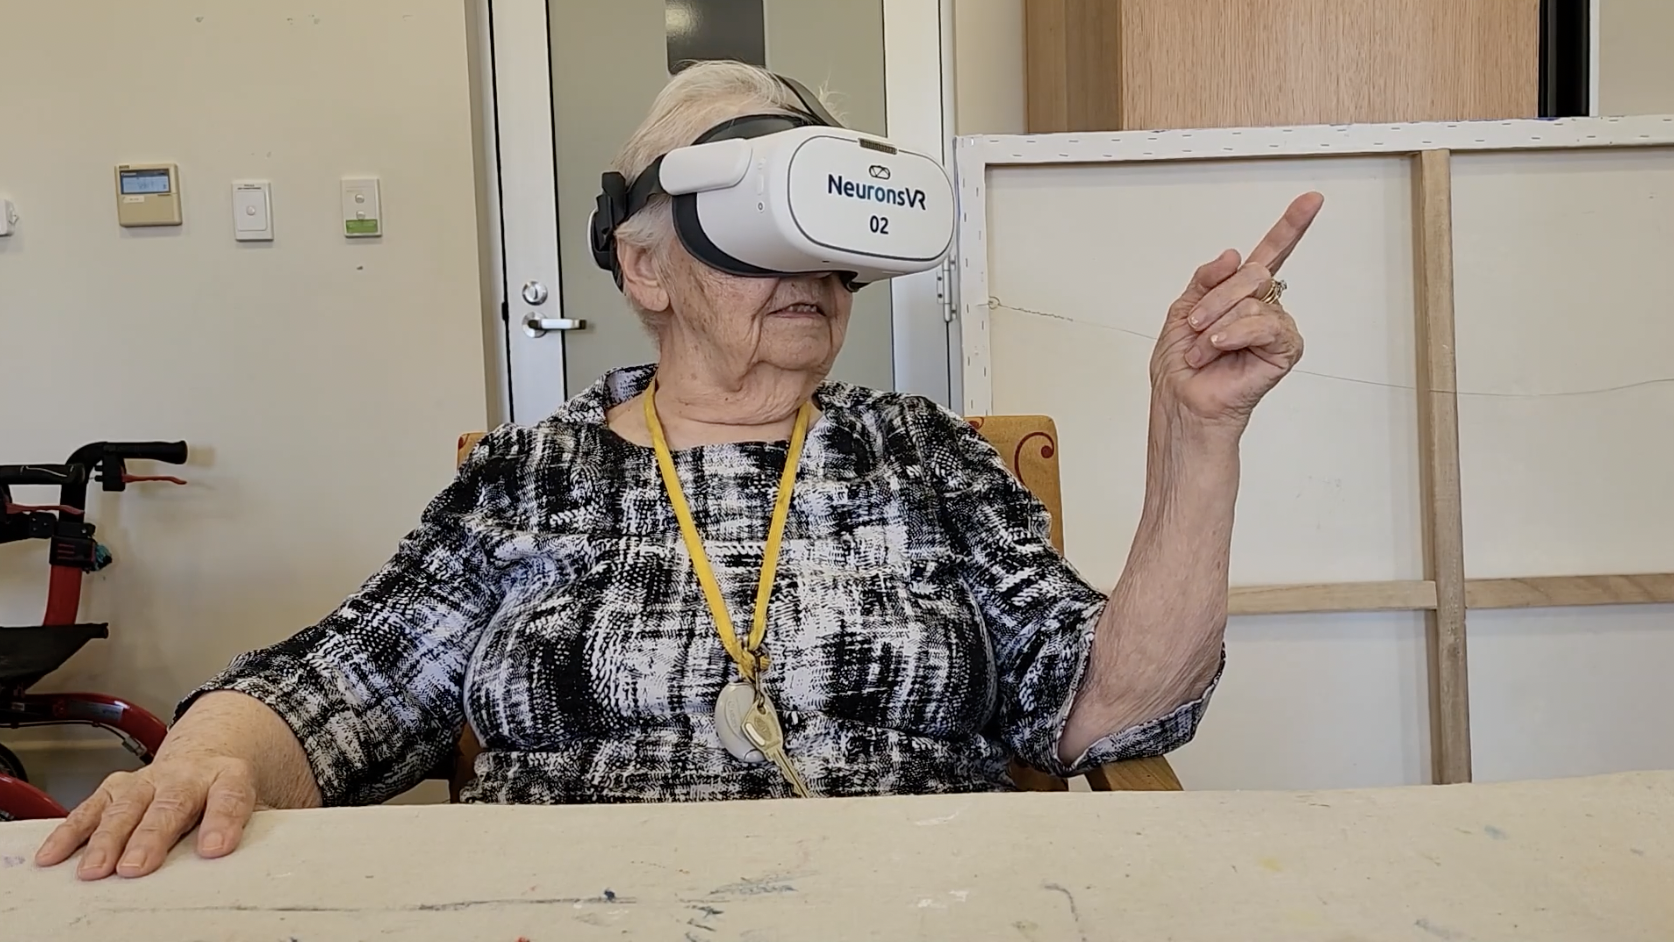 Rediscovering Italy through Virtual Reality: Josie’s Journey with NeuronsVR